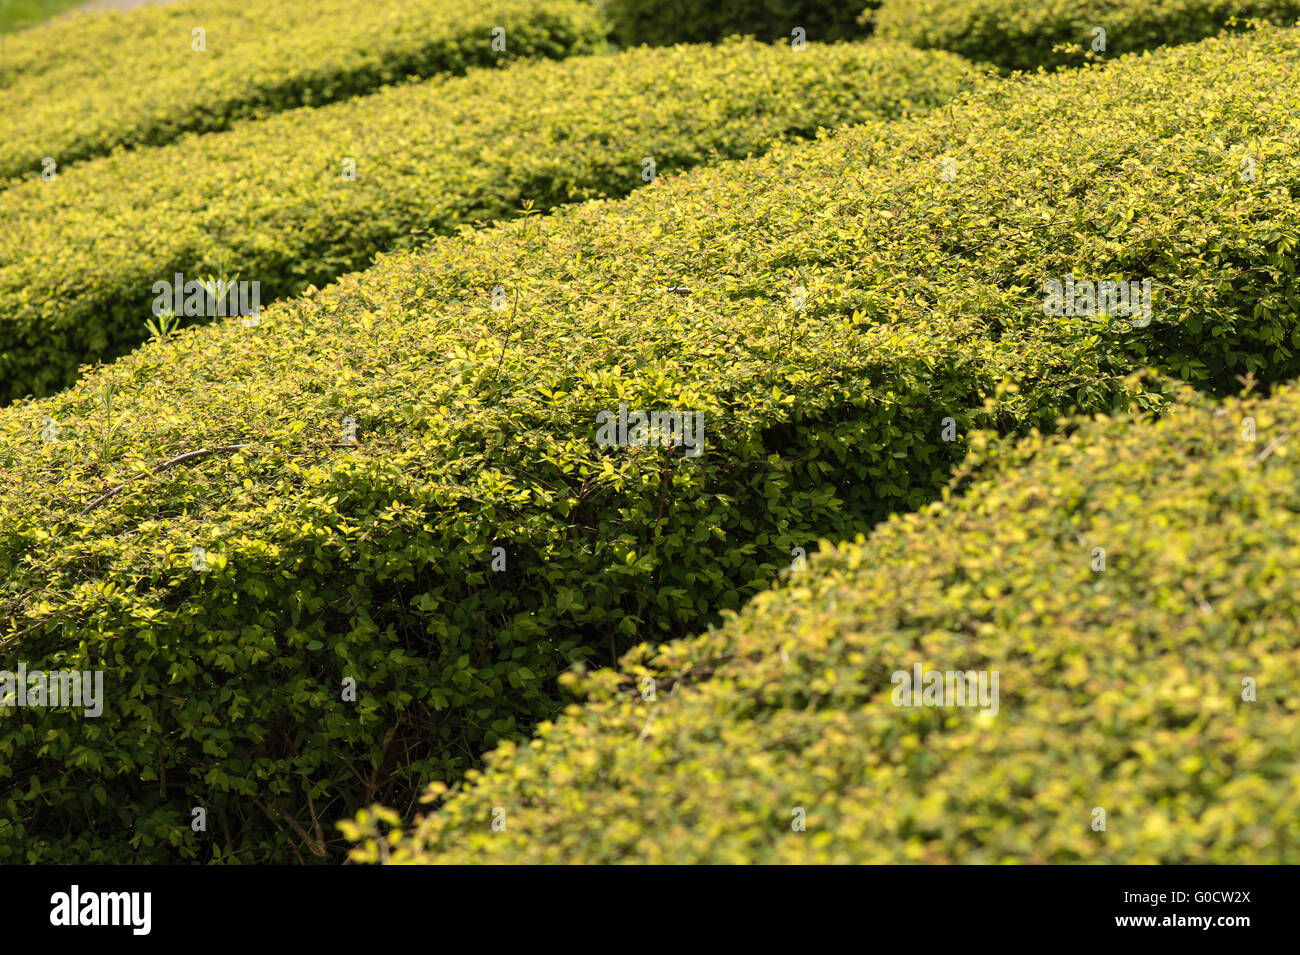 Trimmed and symmetrical Evergreen Garden Hedge Stock Photo